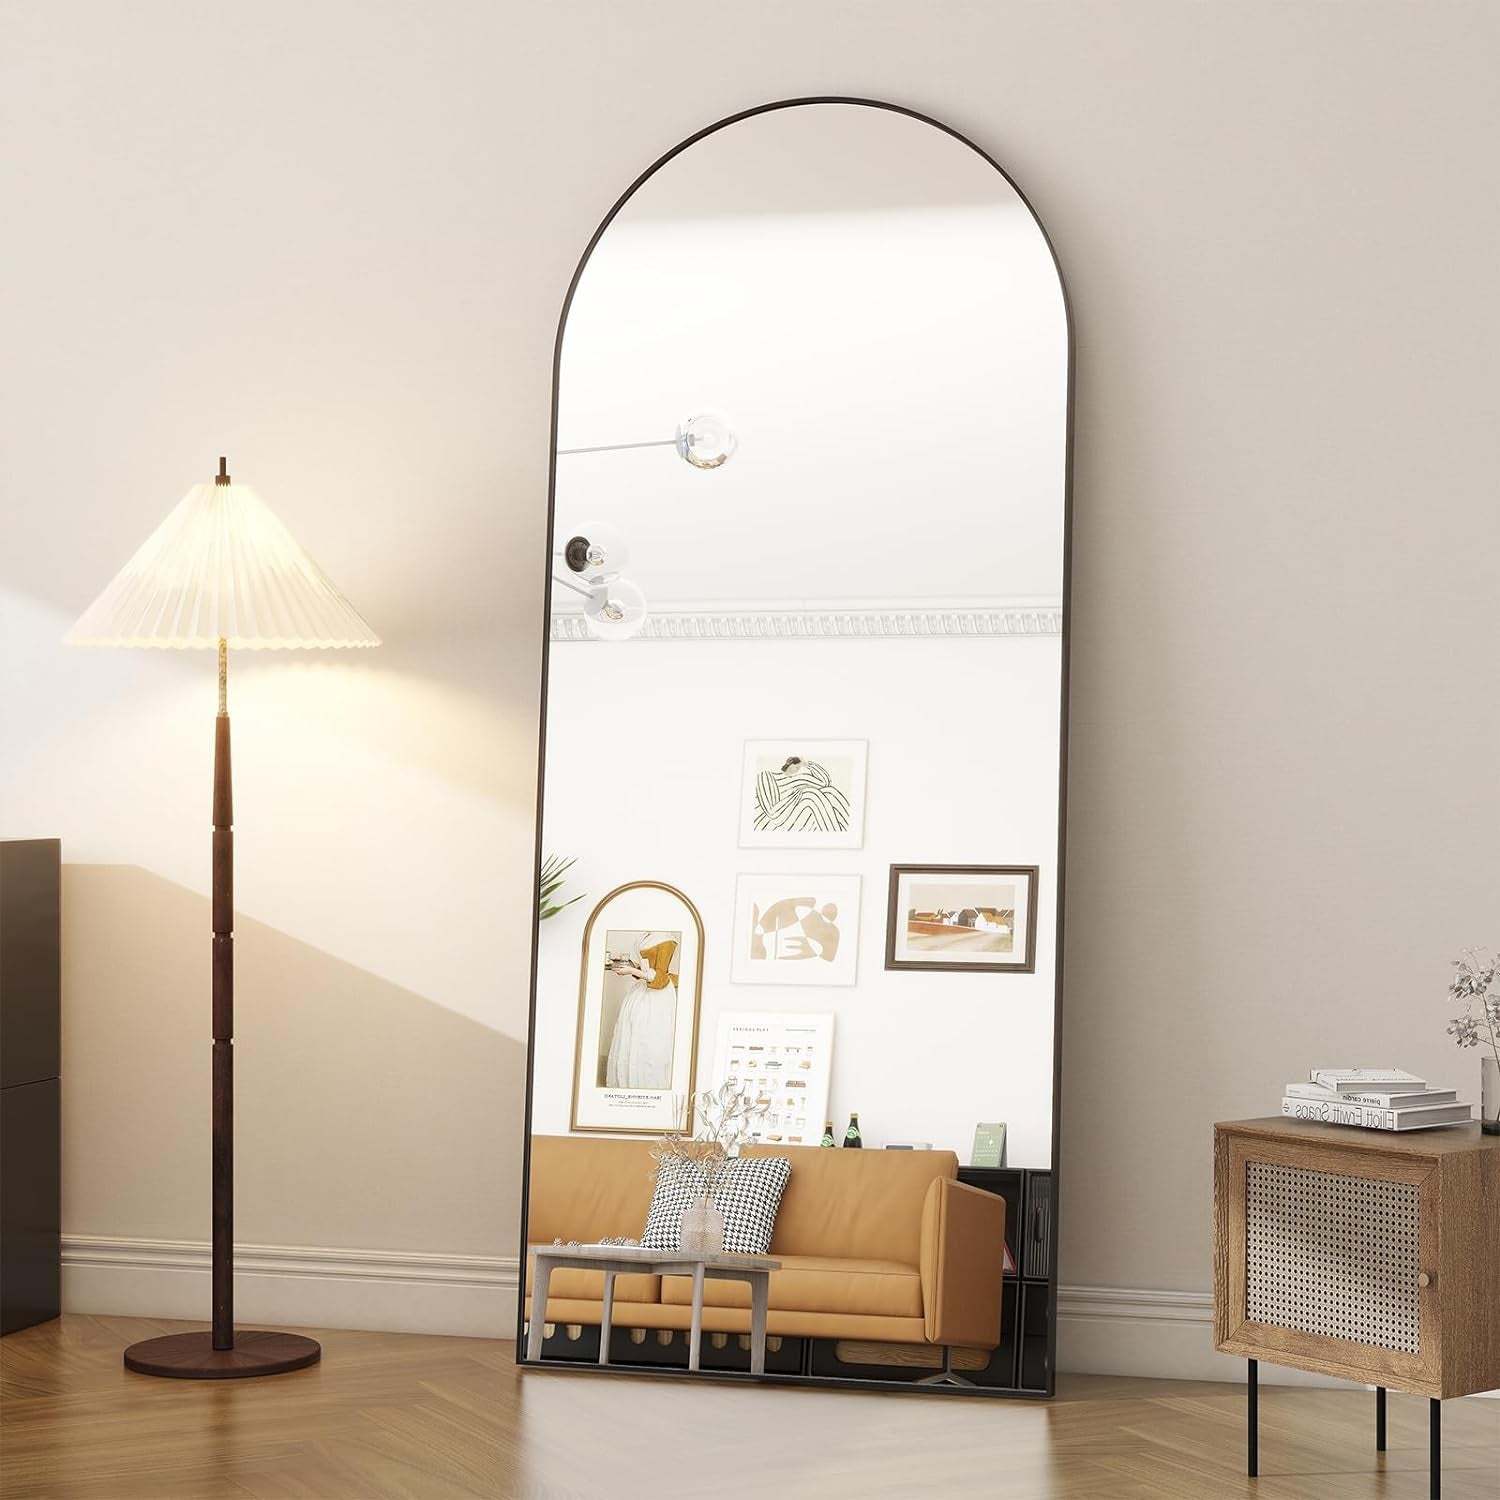 76"X34" Arched Full Length Mirror Free Standing Leaning Mirror Hanging Mounted Mirror Aluminum Frame Modern Simple Home Decor for Living Room Bedroom Cloakroom, Black - Design By Technique